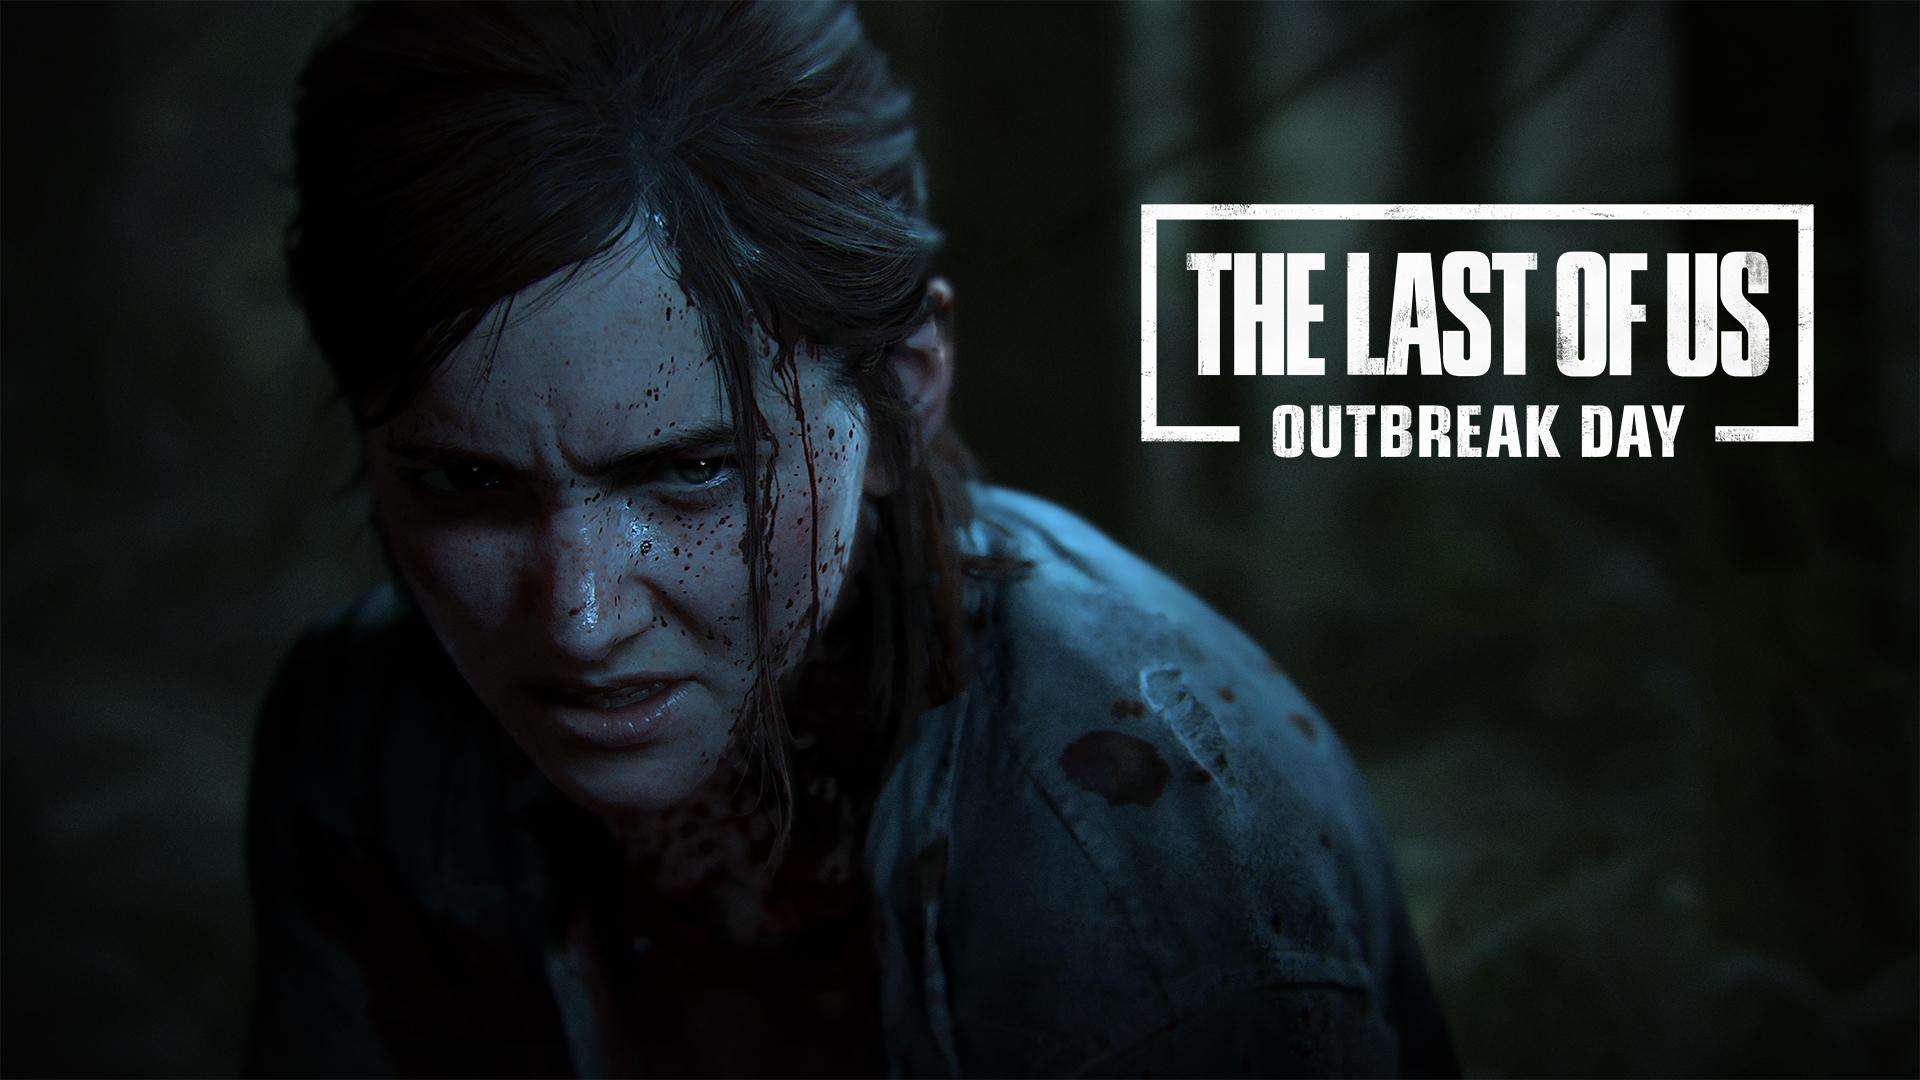 Multiplayer The Last of Us